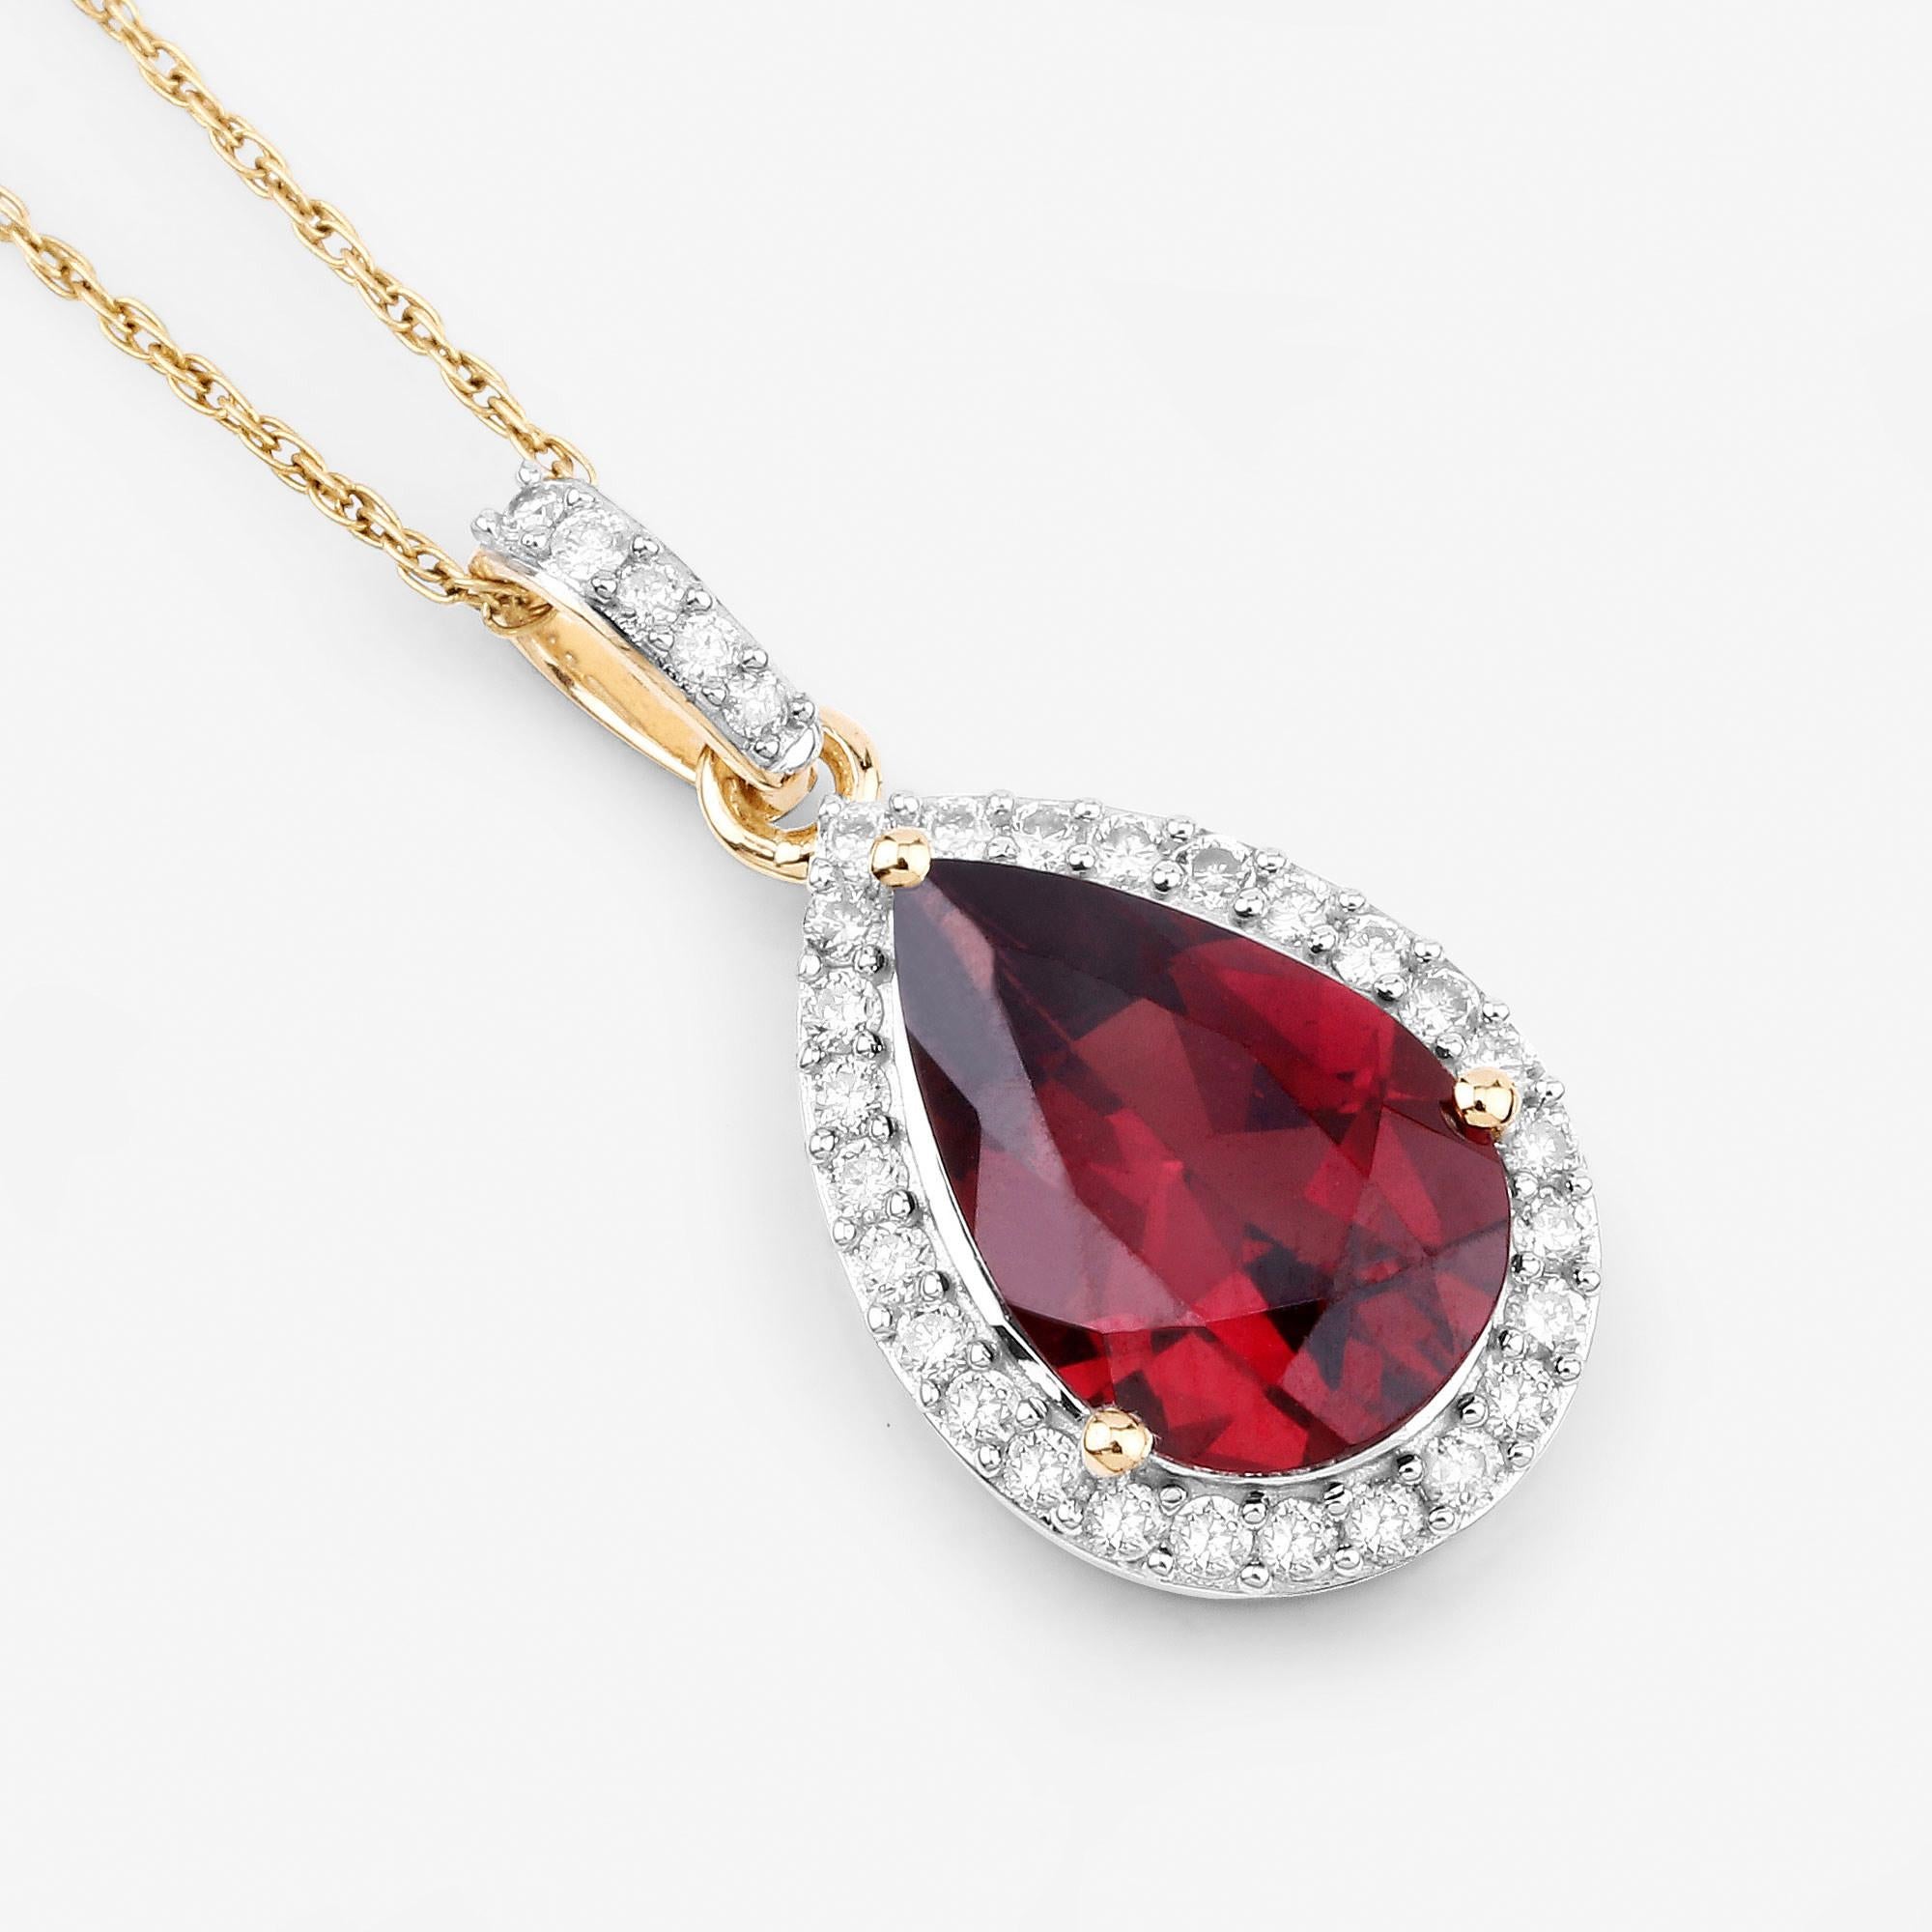 Natural Rhodolite Garnet Pendant Diamond Setting 3.30 Carats 14K Yellow Gold In Excellent Condition For Sale In Laguna Niguel, CA